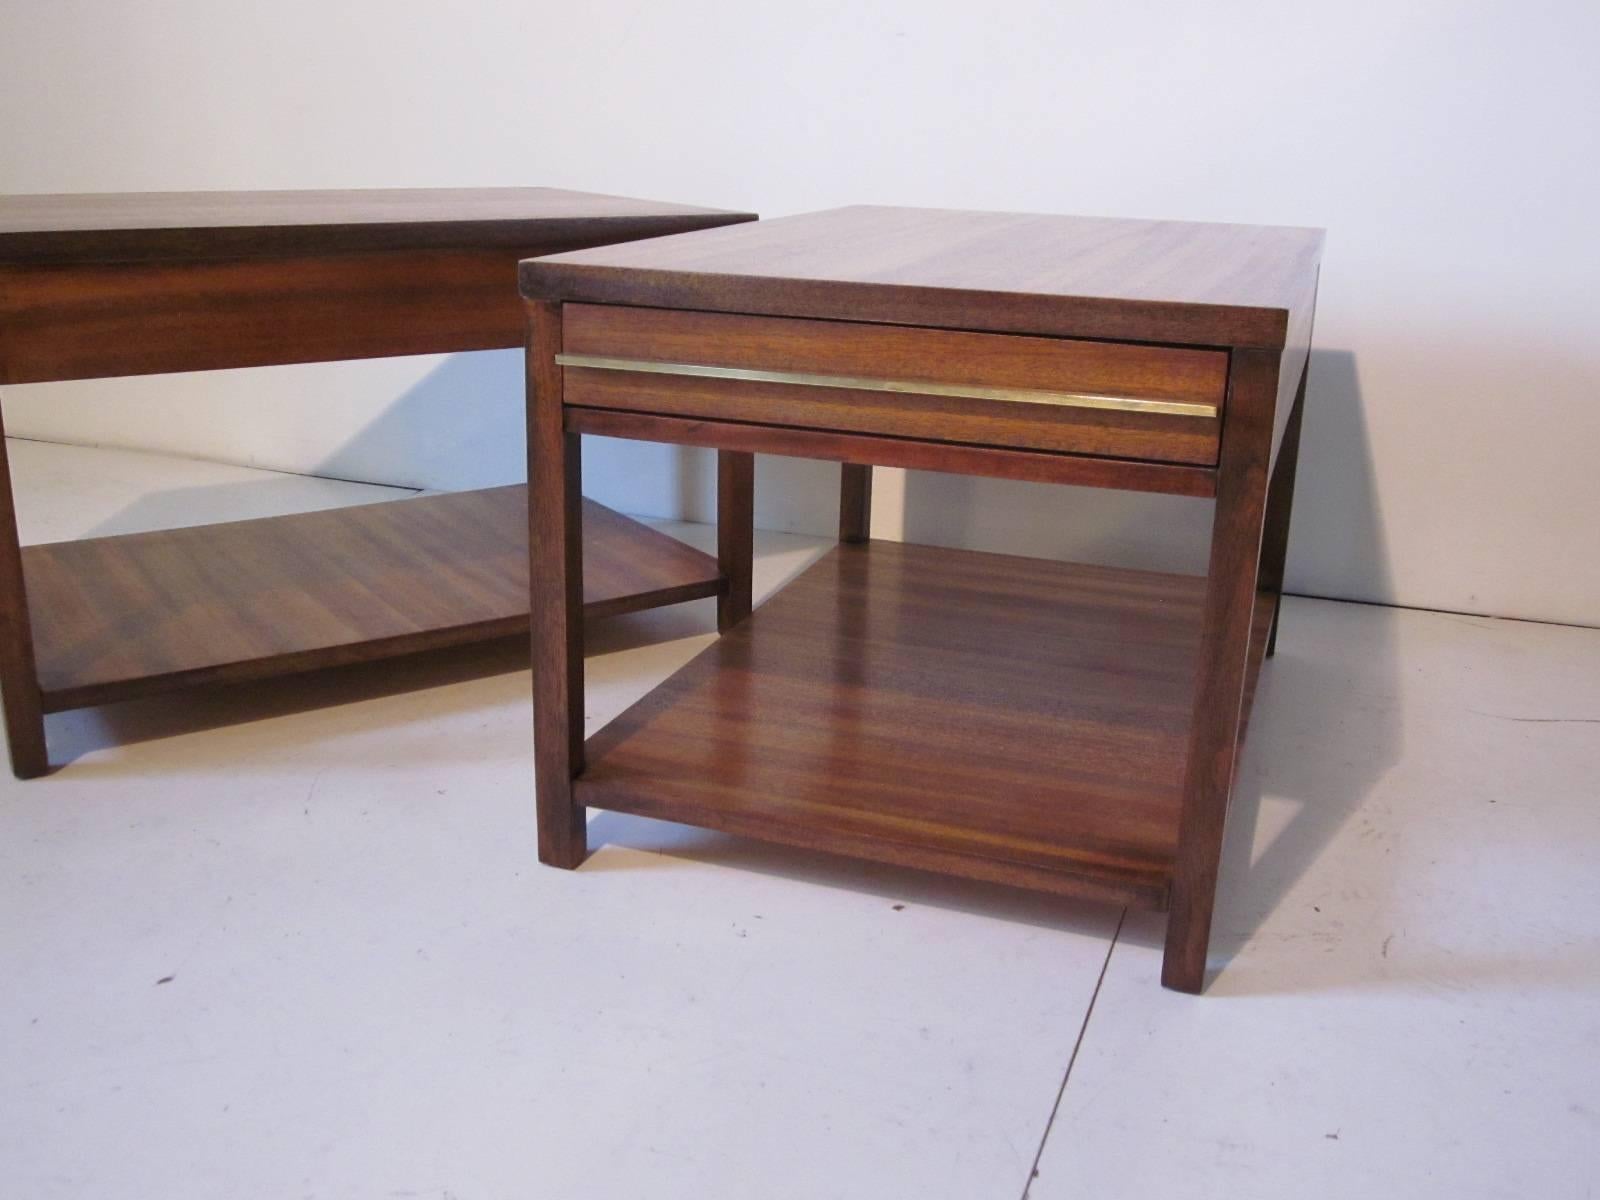 Well grained Indonesian mahogany end tables or nightstands with lower shelve area and one drawer with long thin brass pulls, manufactured by The American of Martinsville Furniture Company.